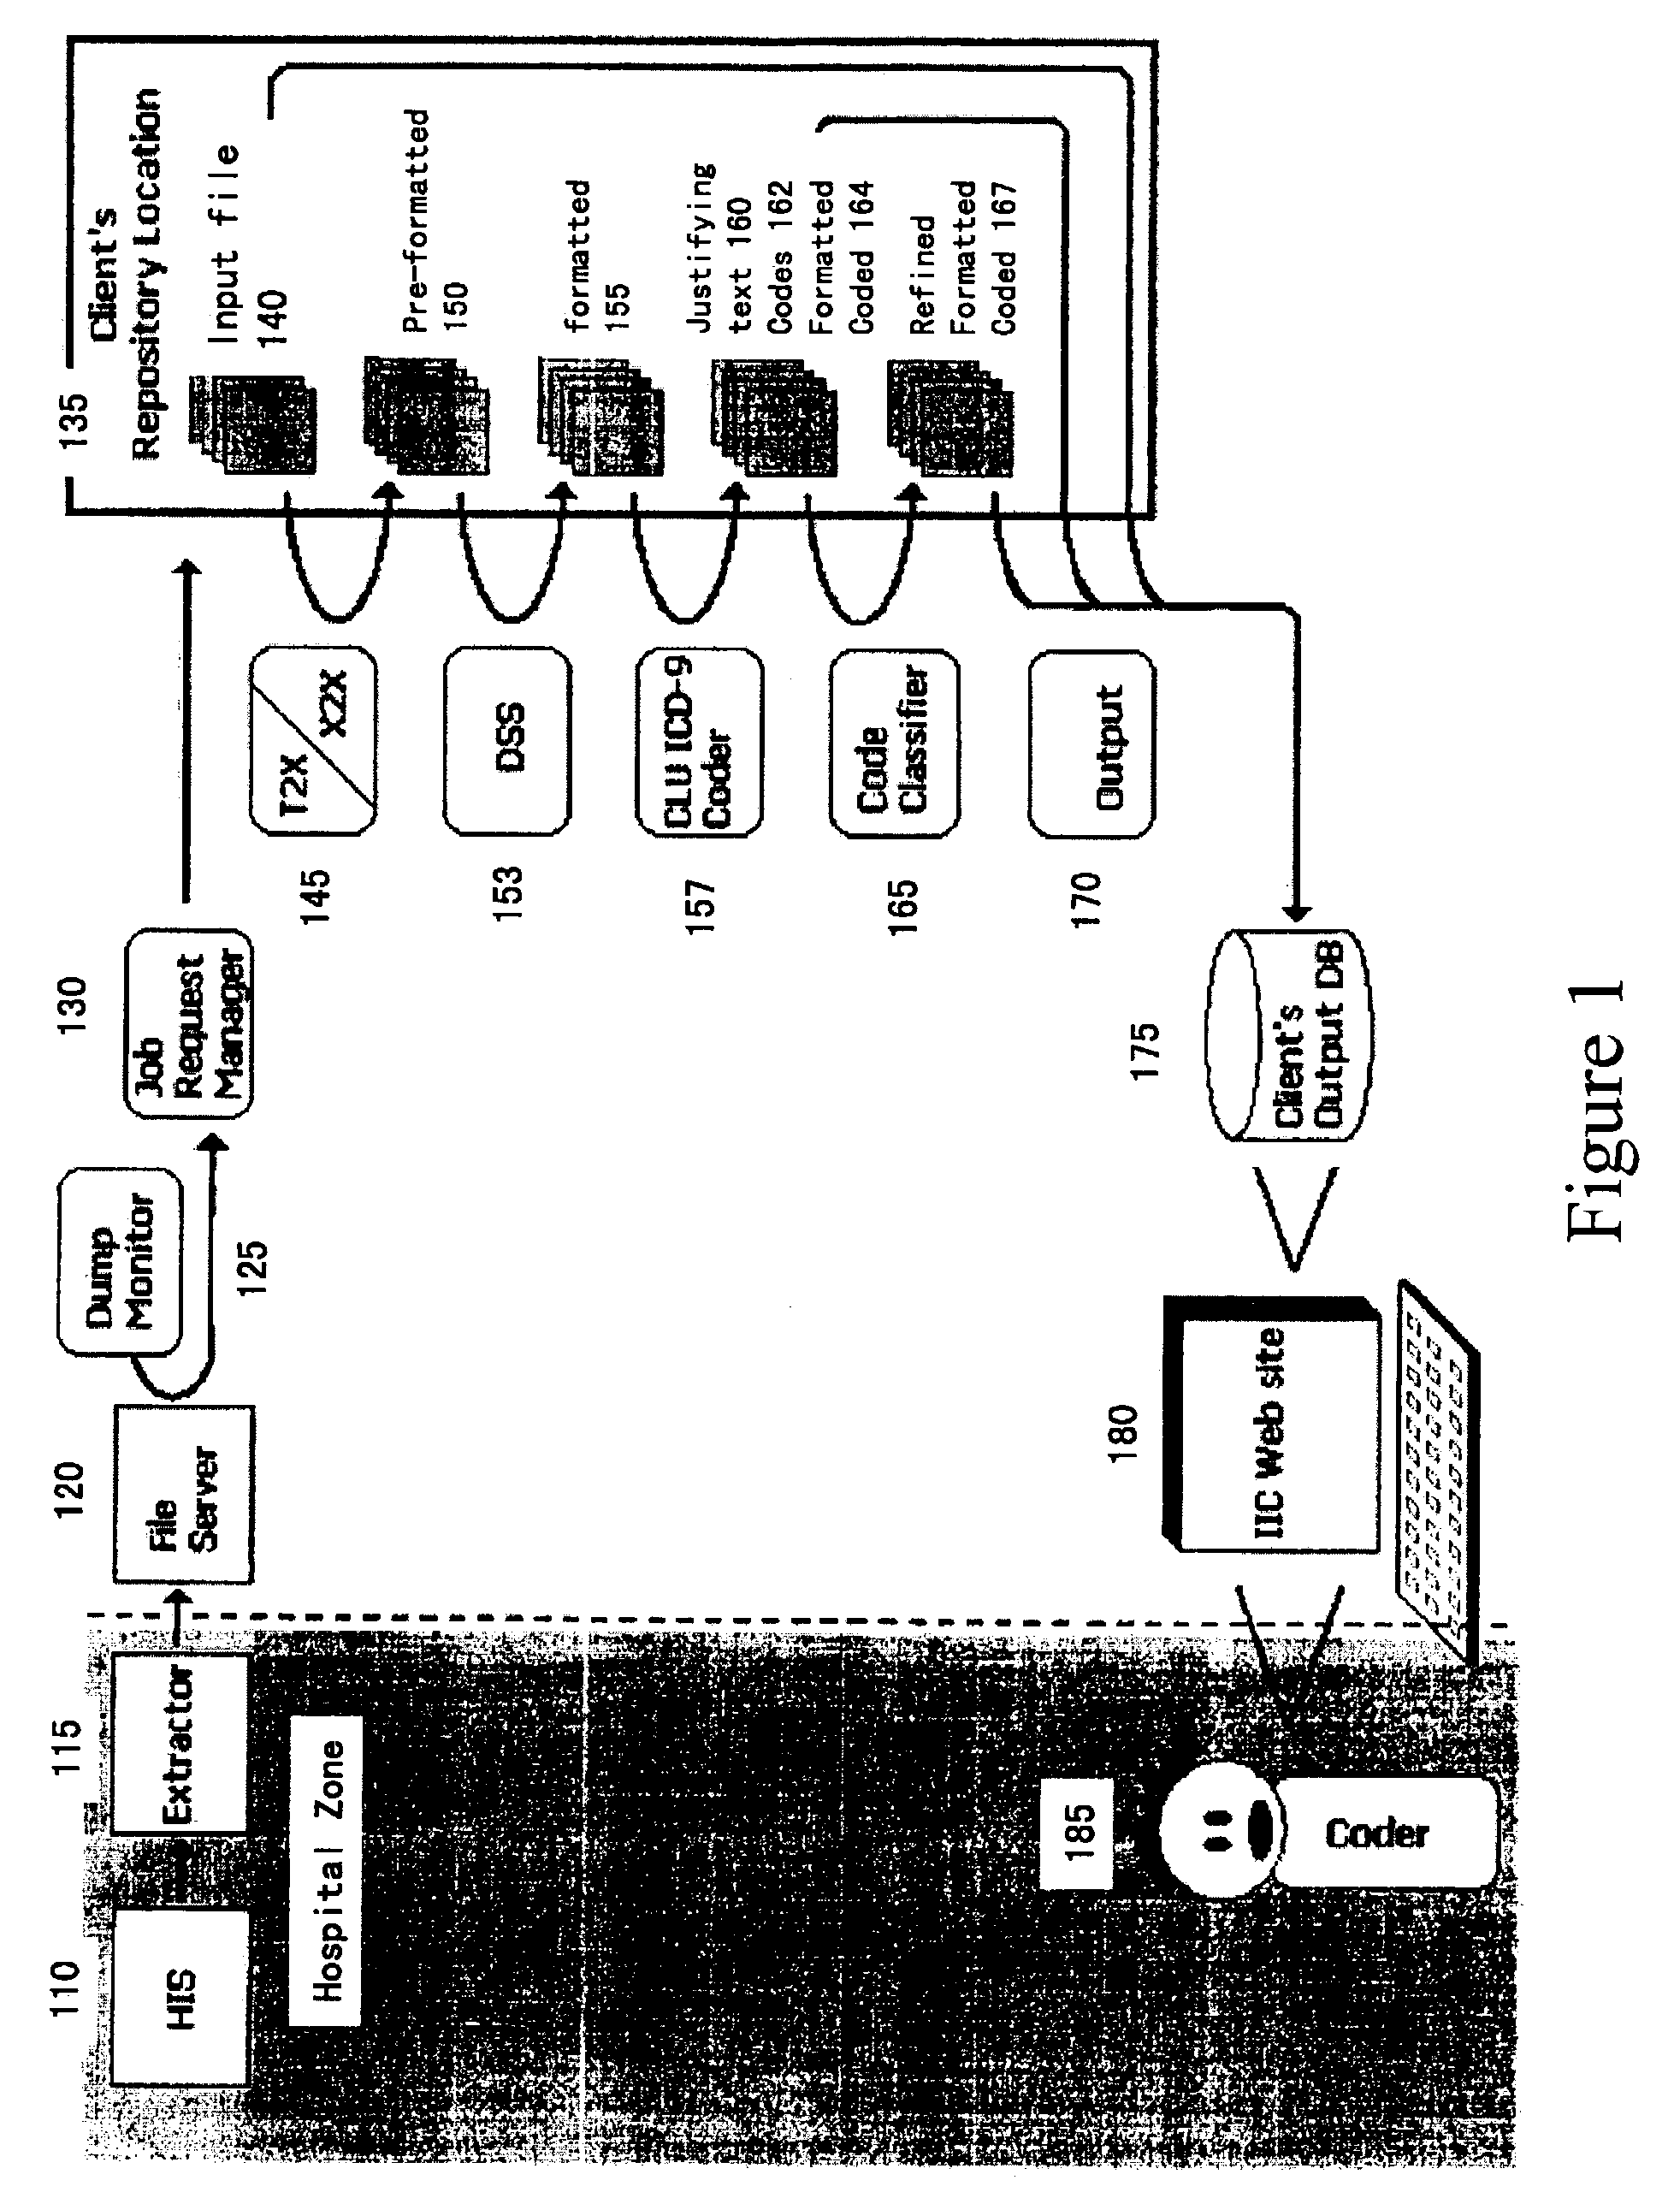 Systems and methods for coding information